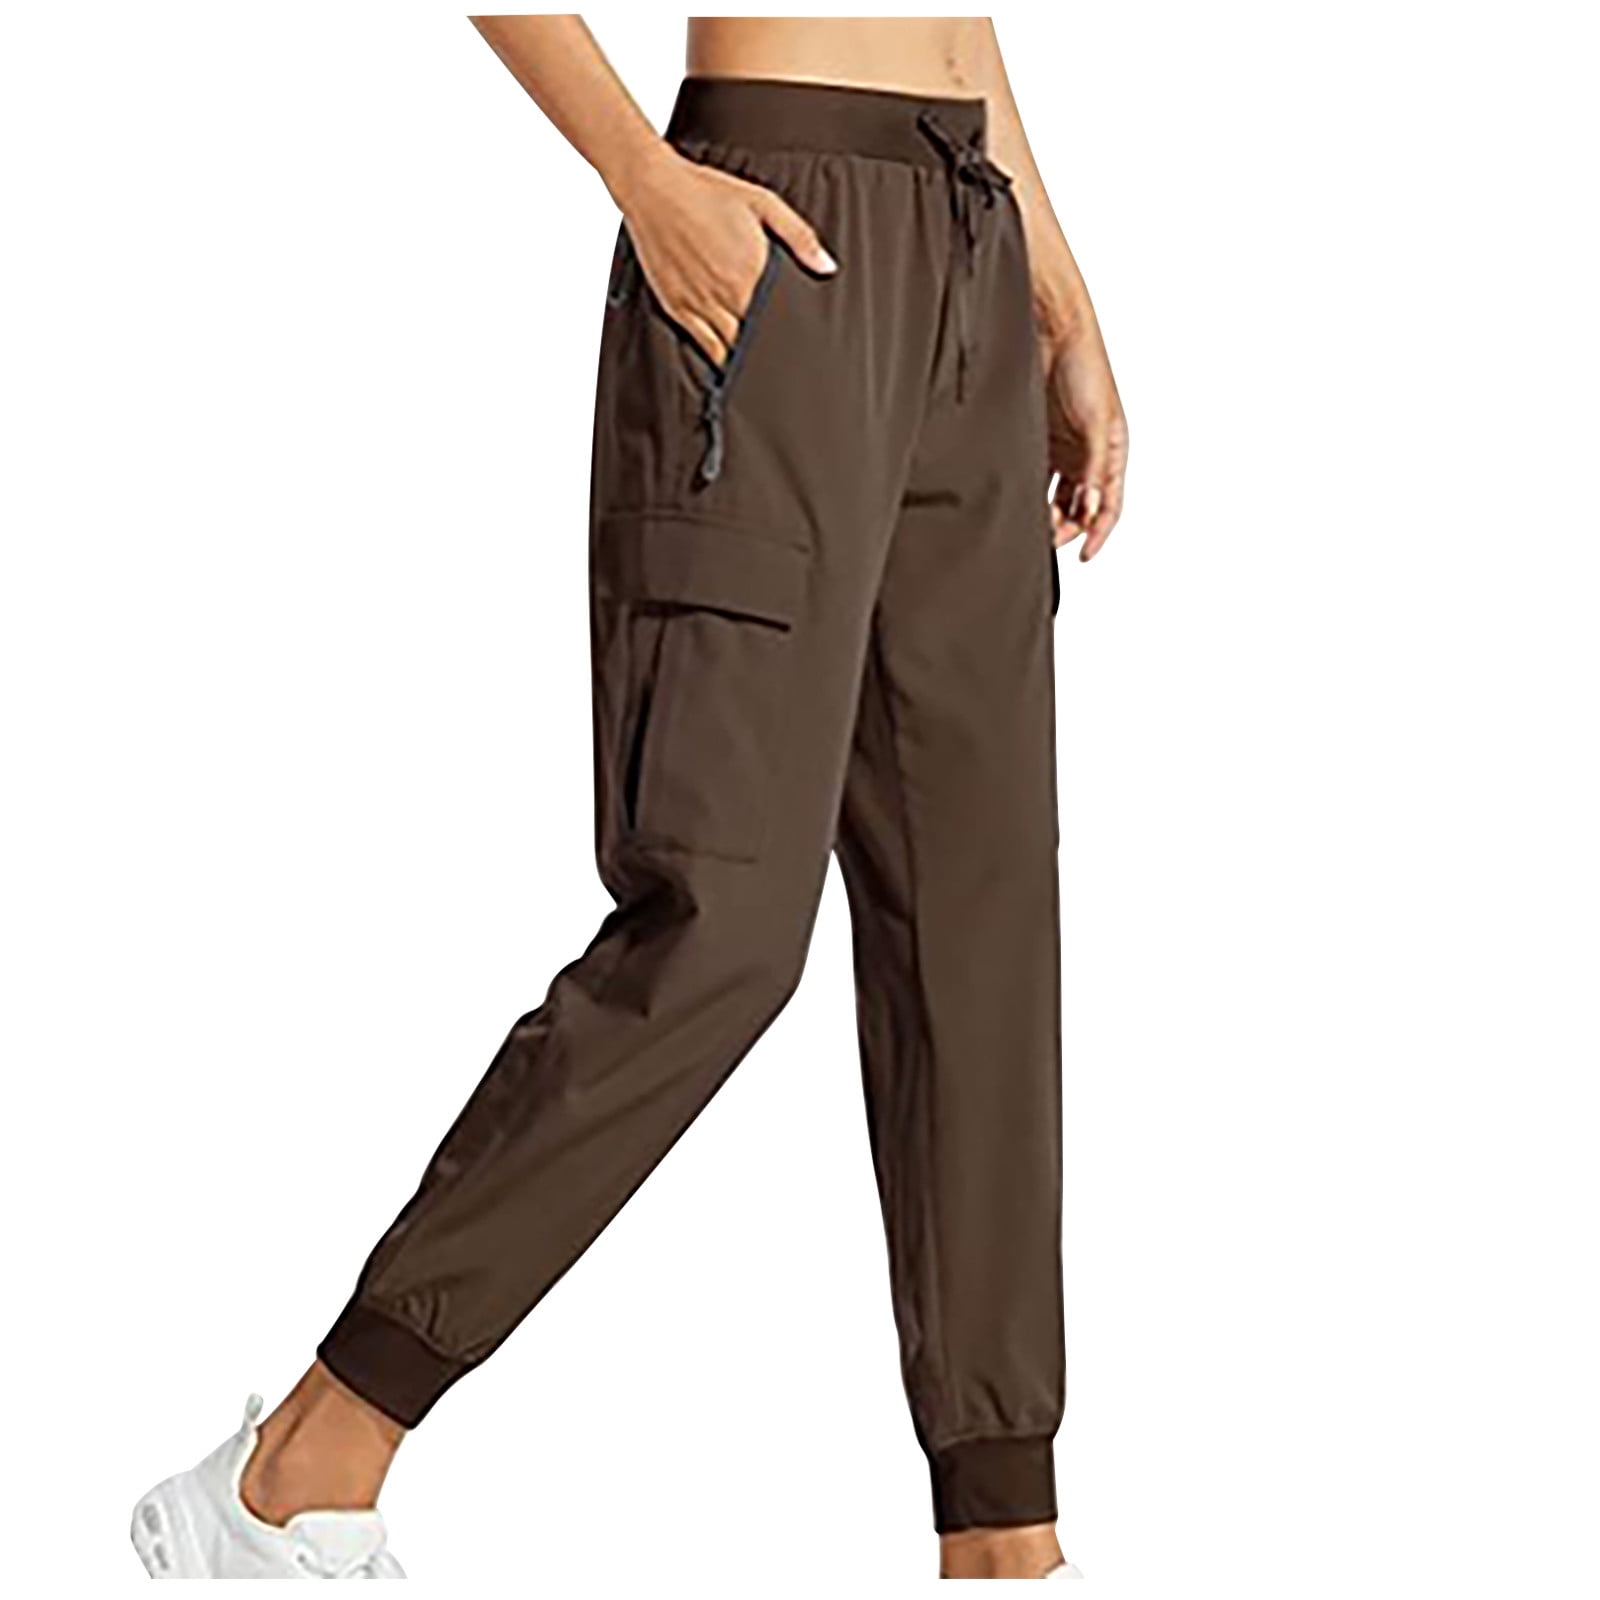 Ecqkame Women's Joggers Pants Clearance Women's Work Wear Jogging Pants,  Nylon Quick Drying Hiking Pants, Sports, Fitness, Leisure, Outdoor Small  Foot Pants Brown XXXL 